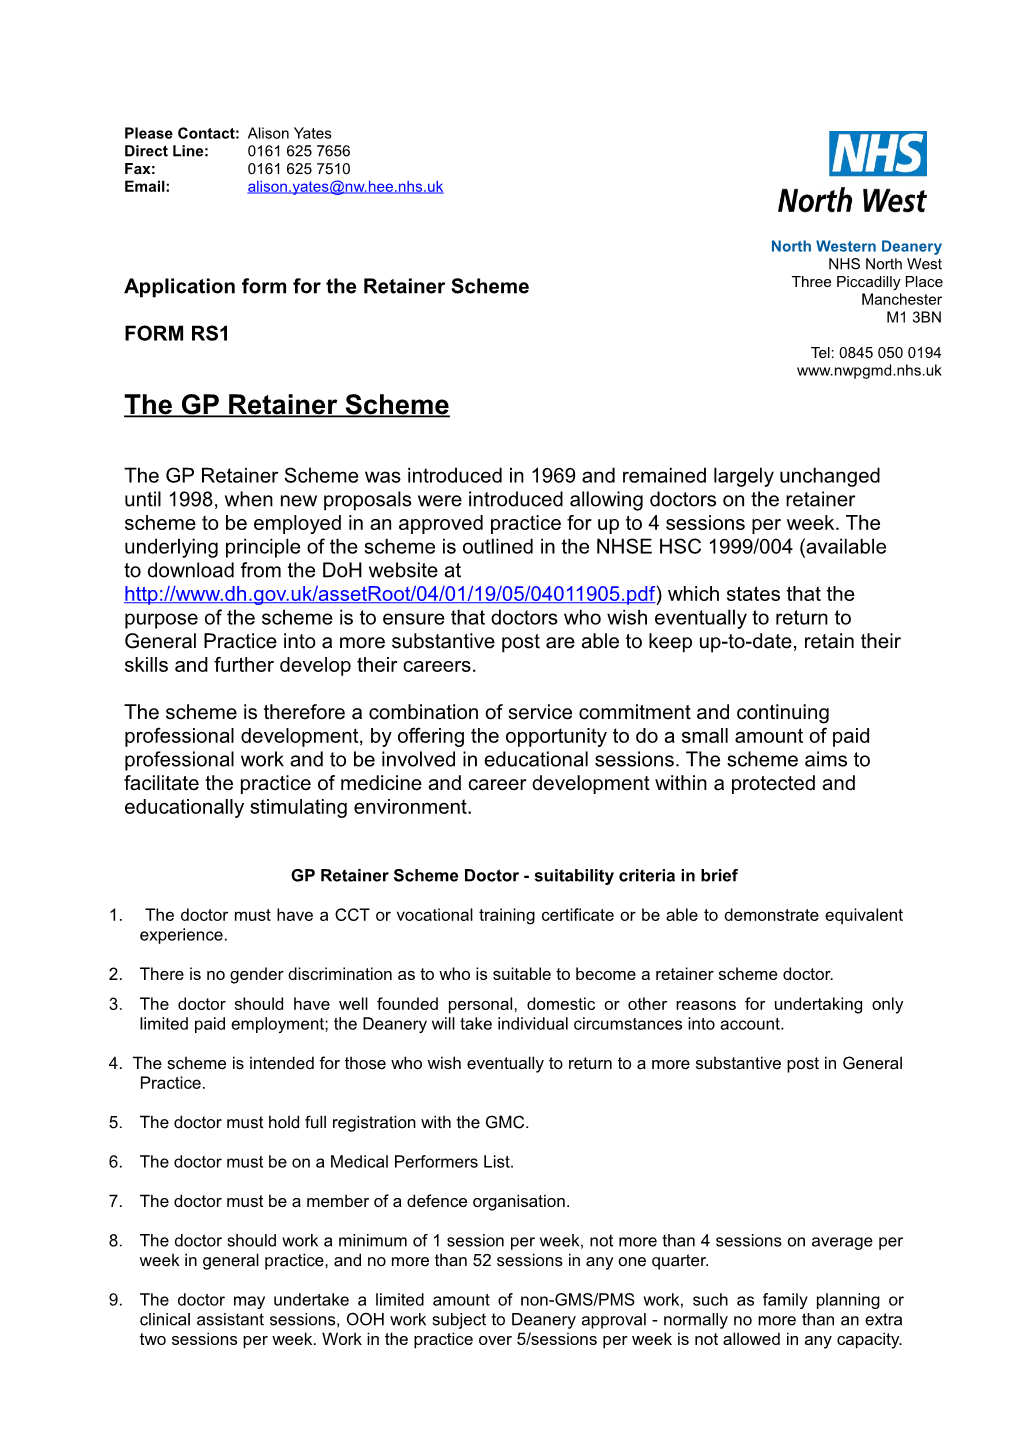 Application Form for the Retainer Scheme